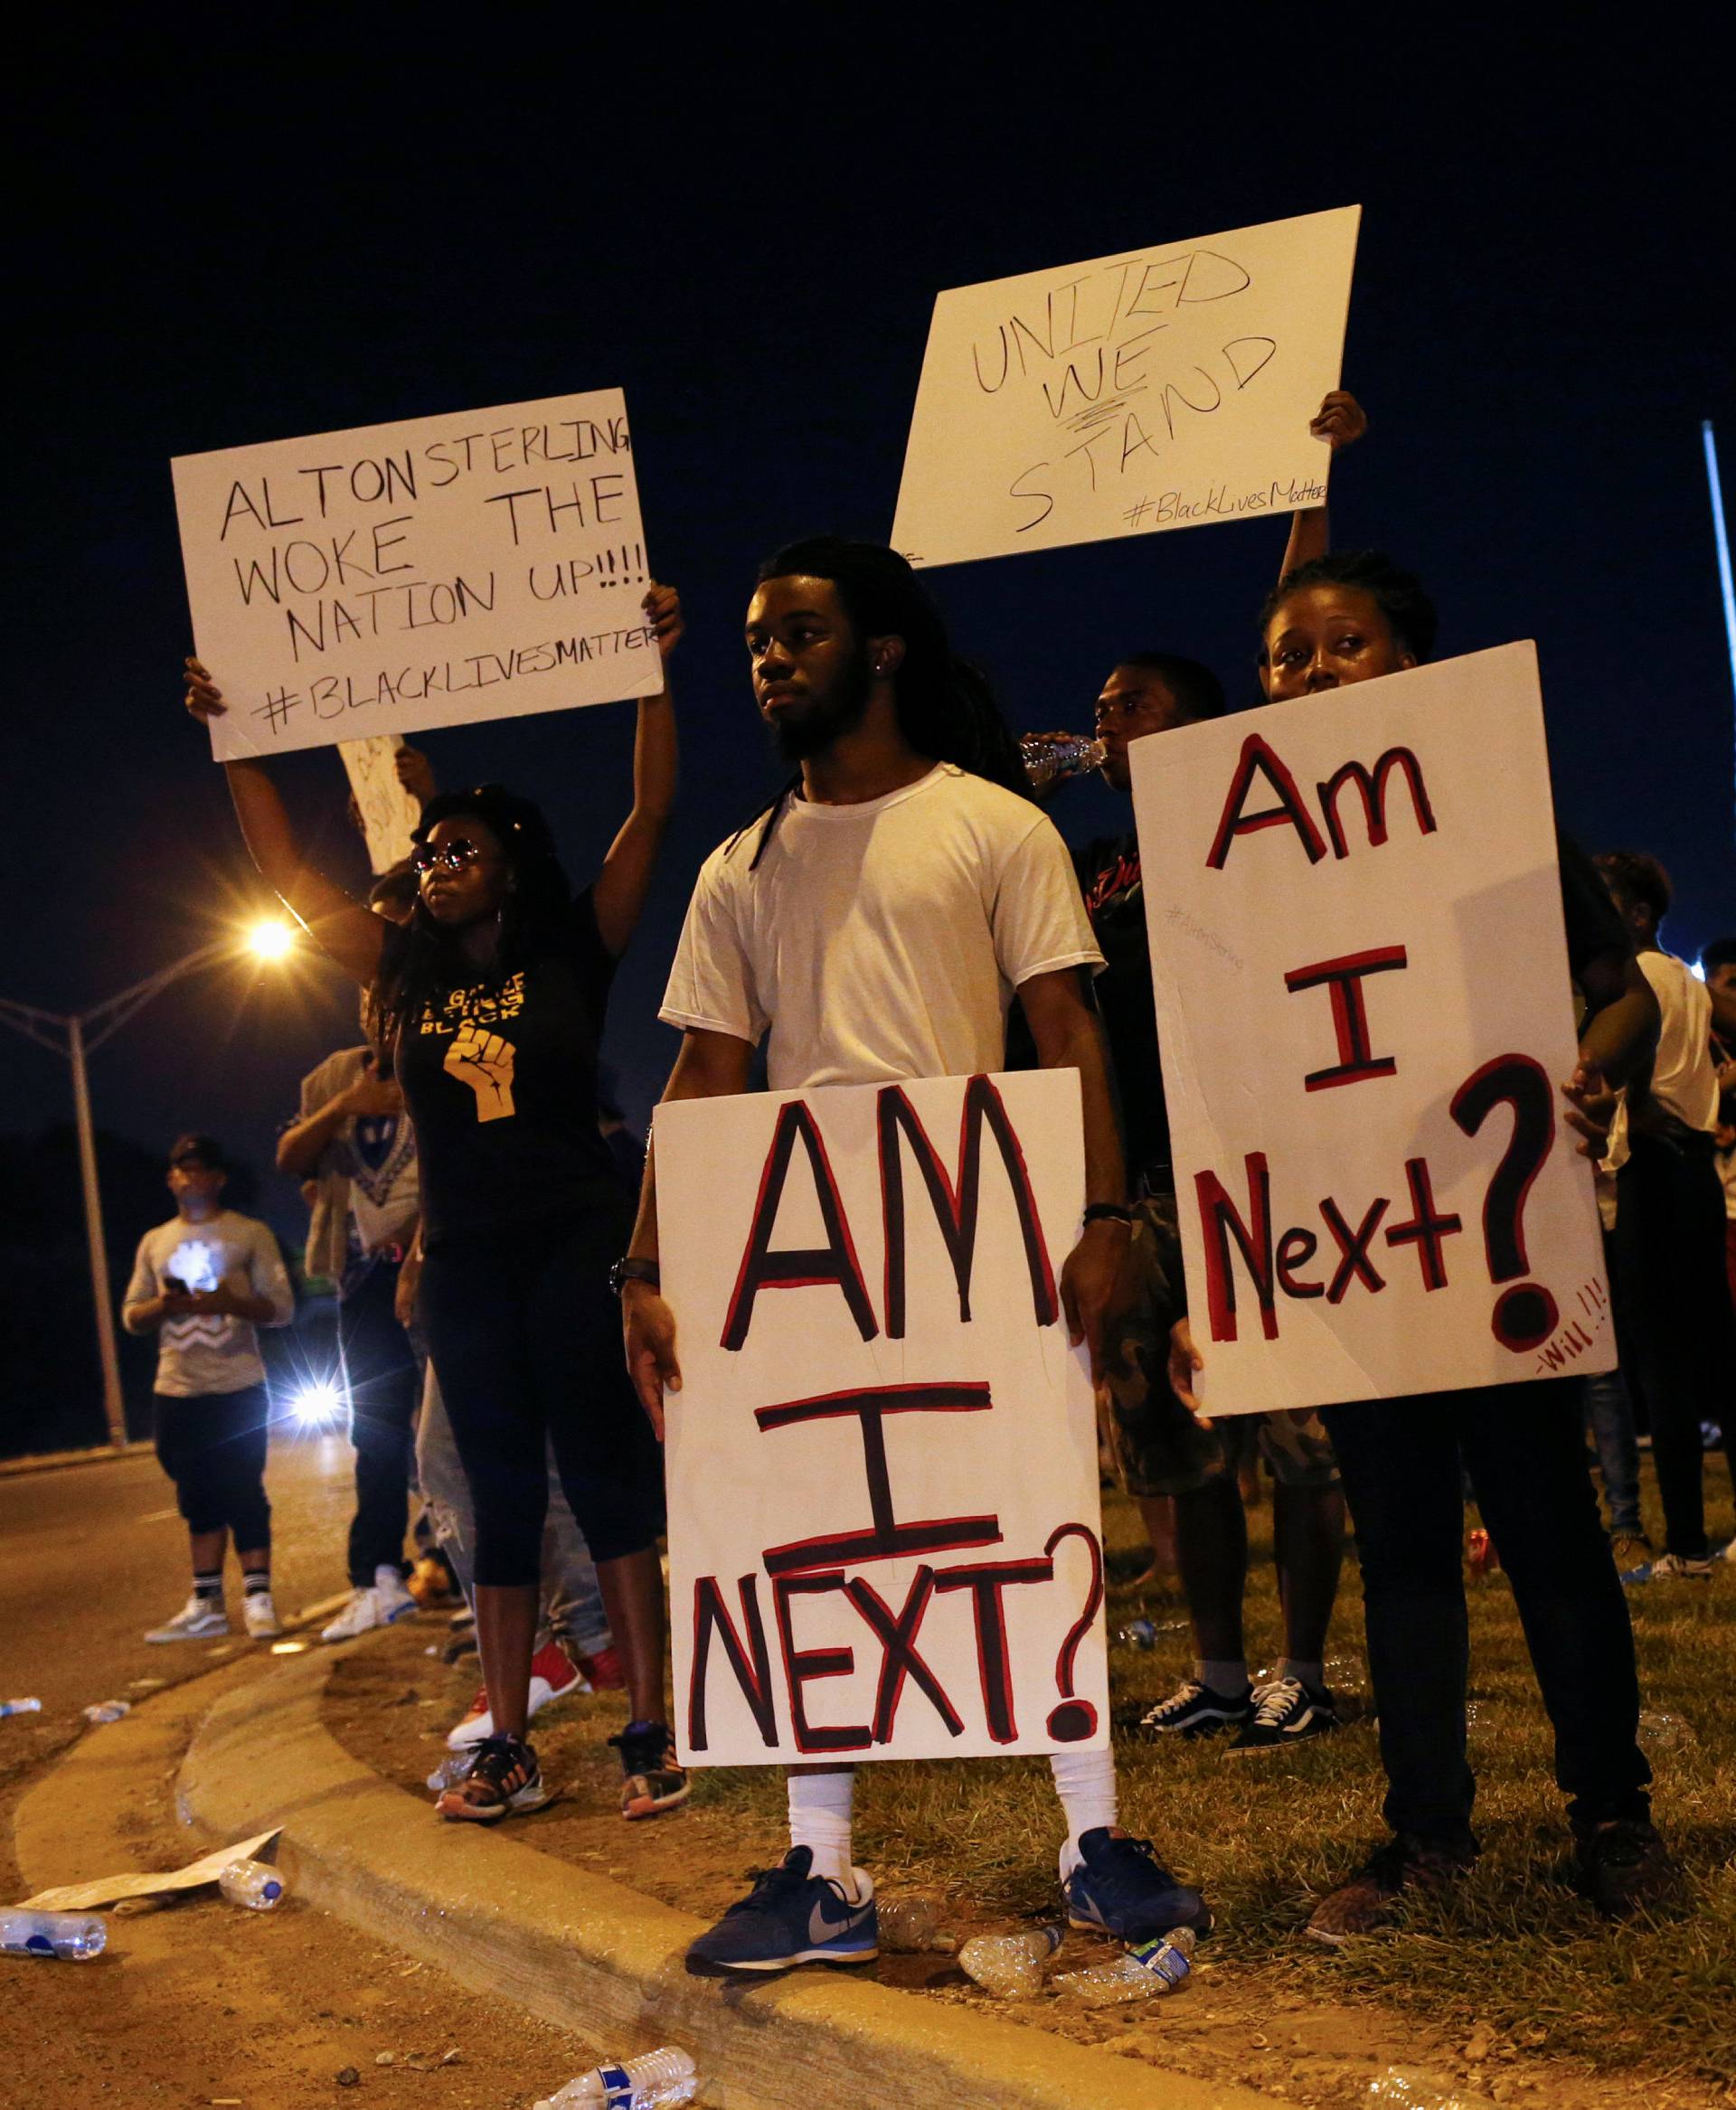 Demonstrators protest the shooting death of Alton Sterling near the headquarters of the Baton Rouge Police Department in Baton Rouge, Louisiana